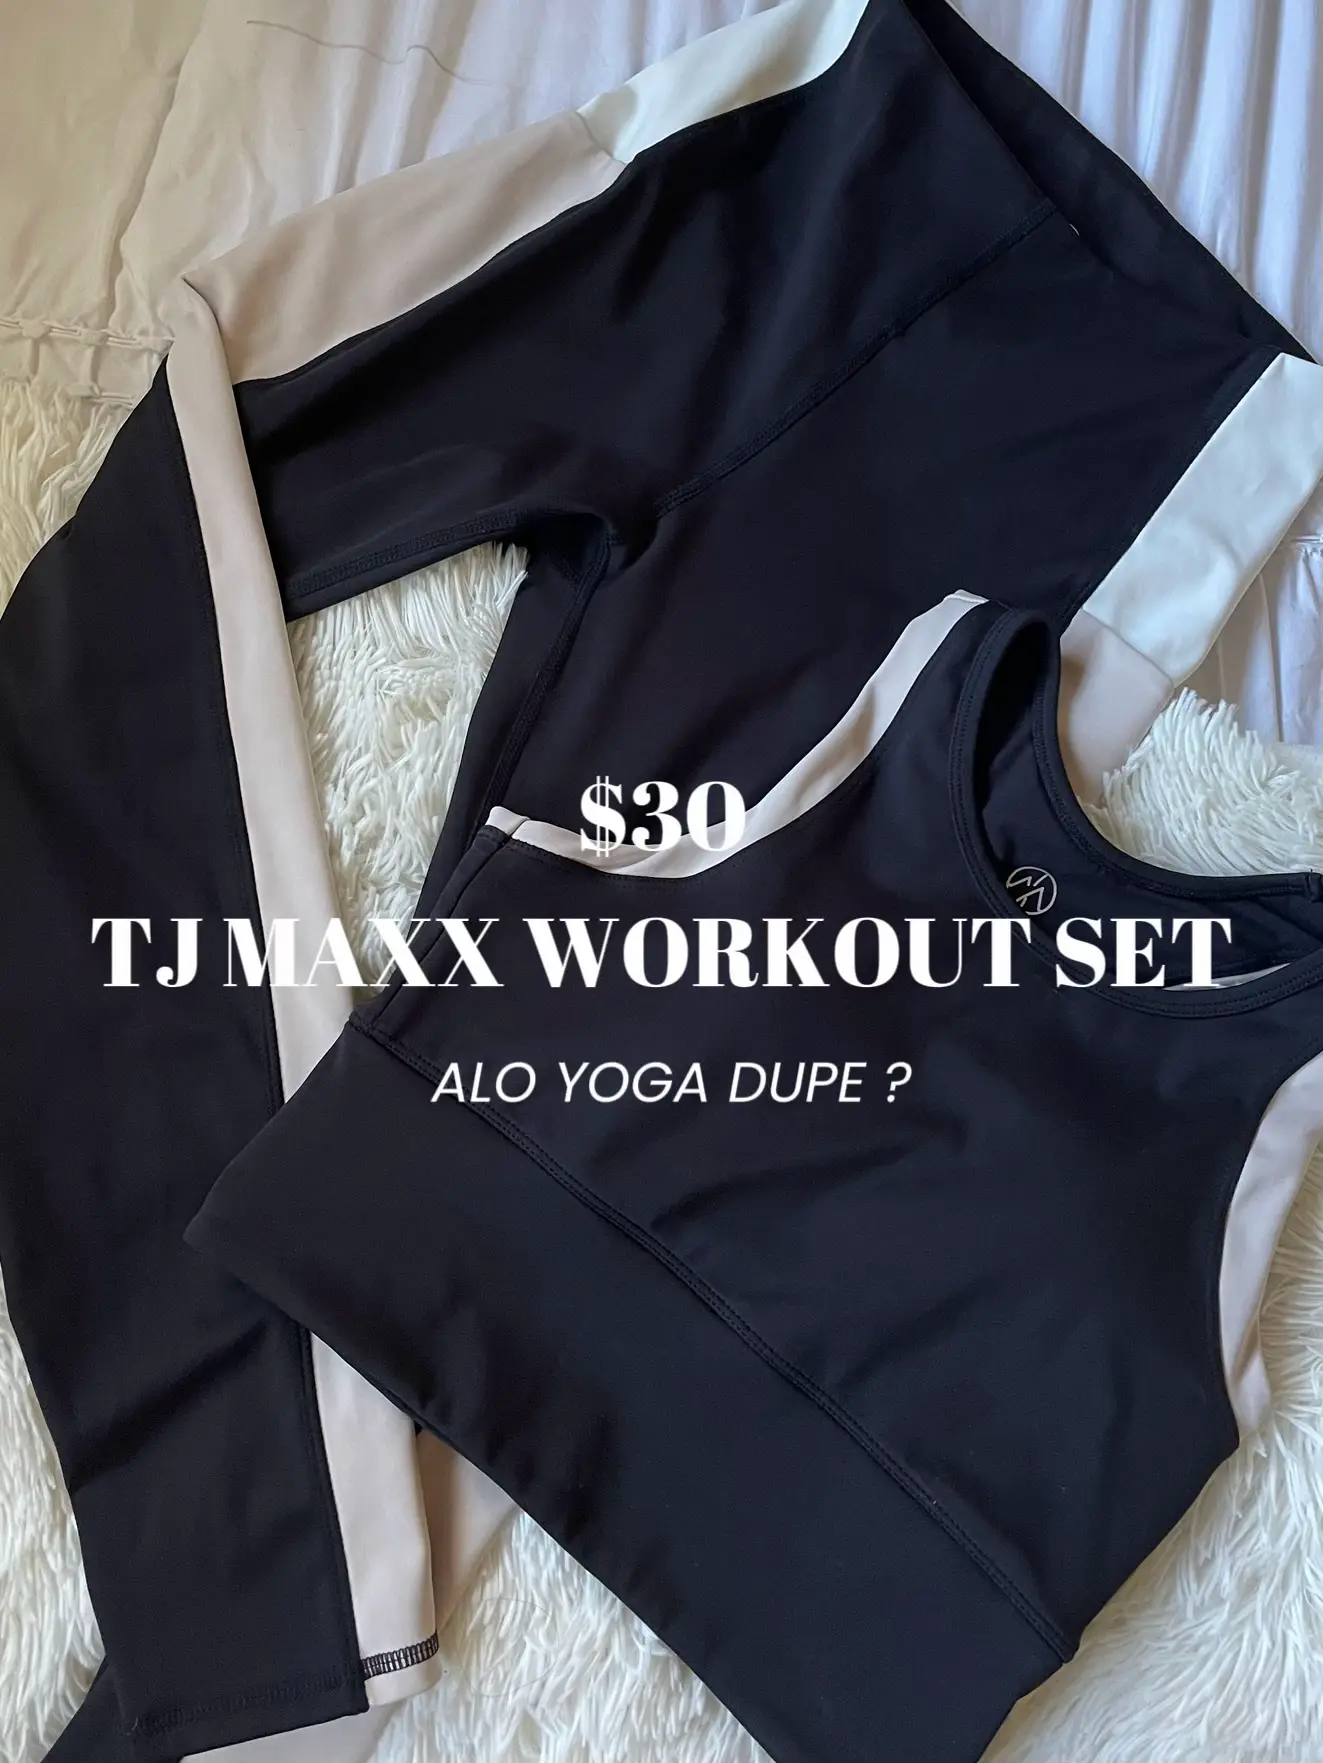 $30 TJ MAXX WORKOUT SET..ALO DUPE?, Gallery posted by ninaabellla